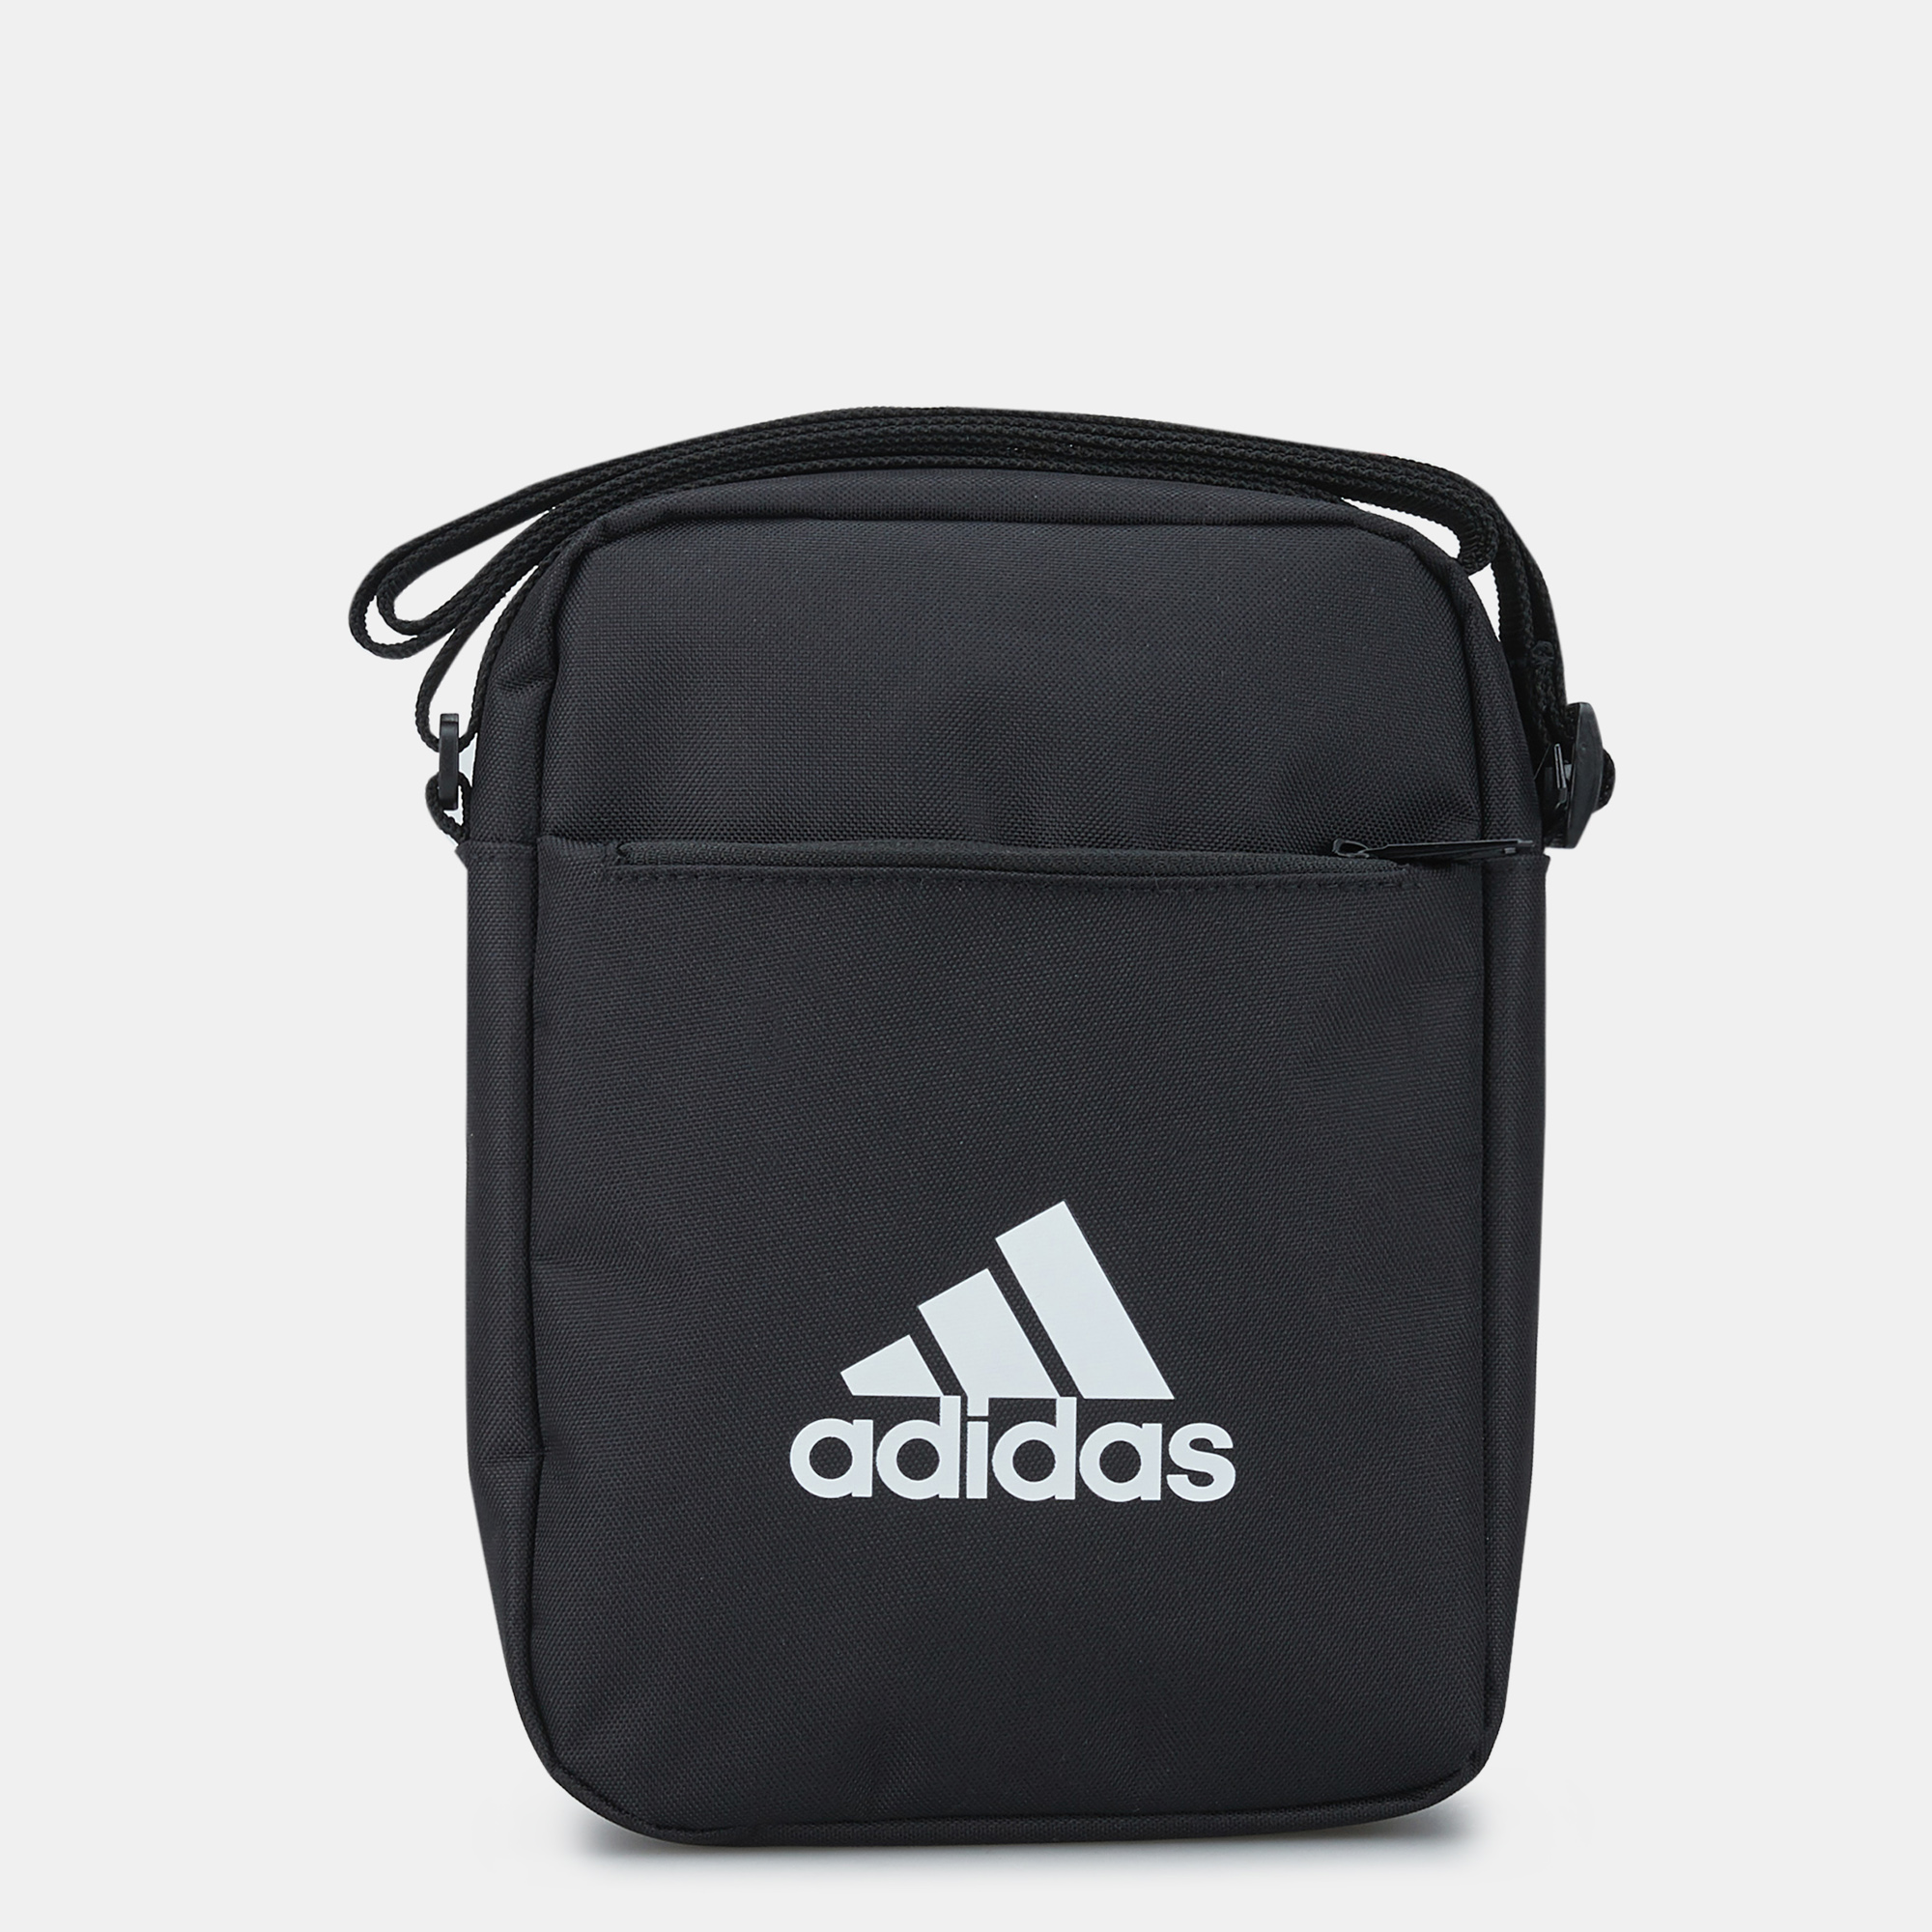 adidas Crossbody Bag | Pouches | Bags and Luggage | Accessories